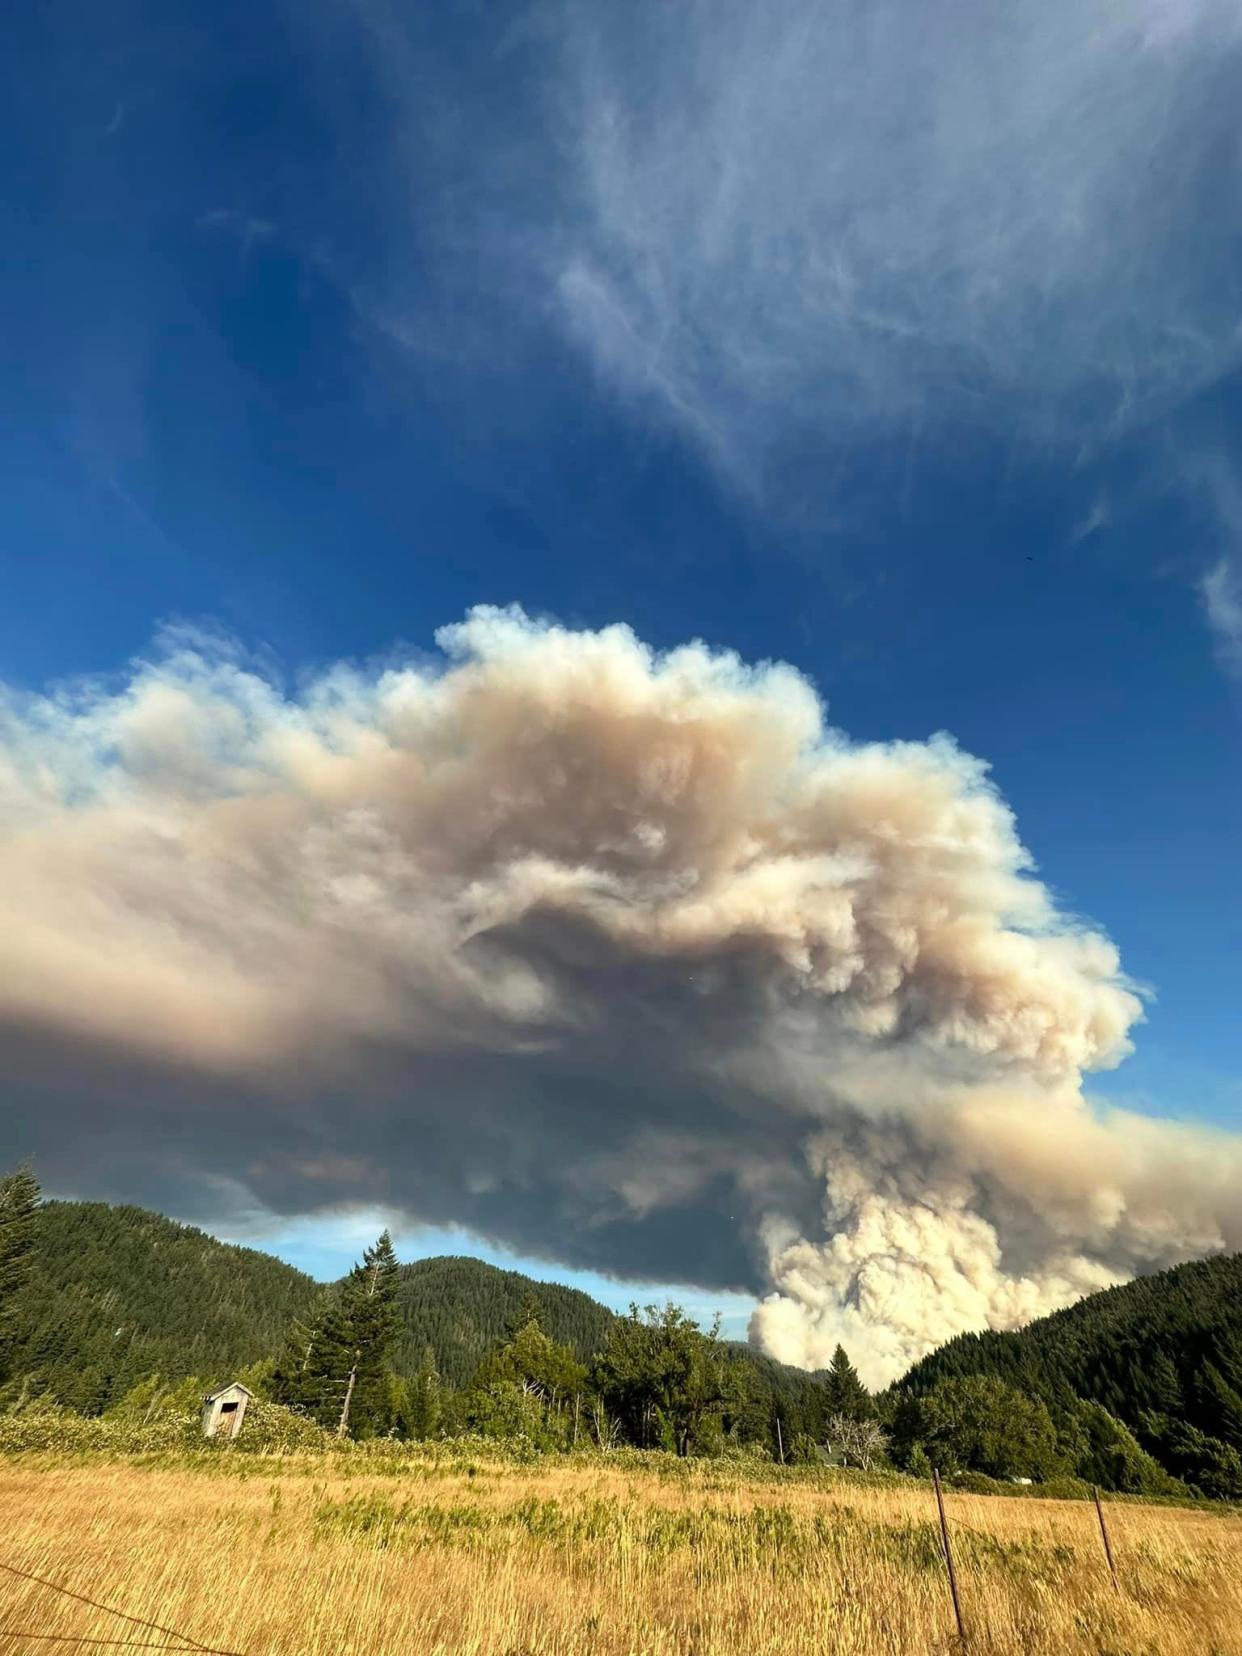 The Flat Fire in southwest Oregon east of Gold Beach burned more than 34,000 acres near Agness and Gold Beach.